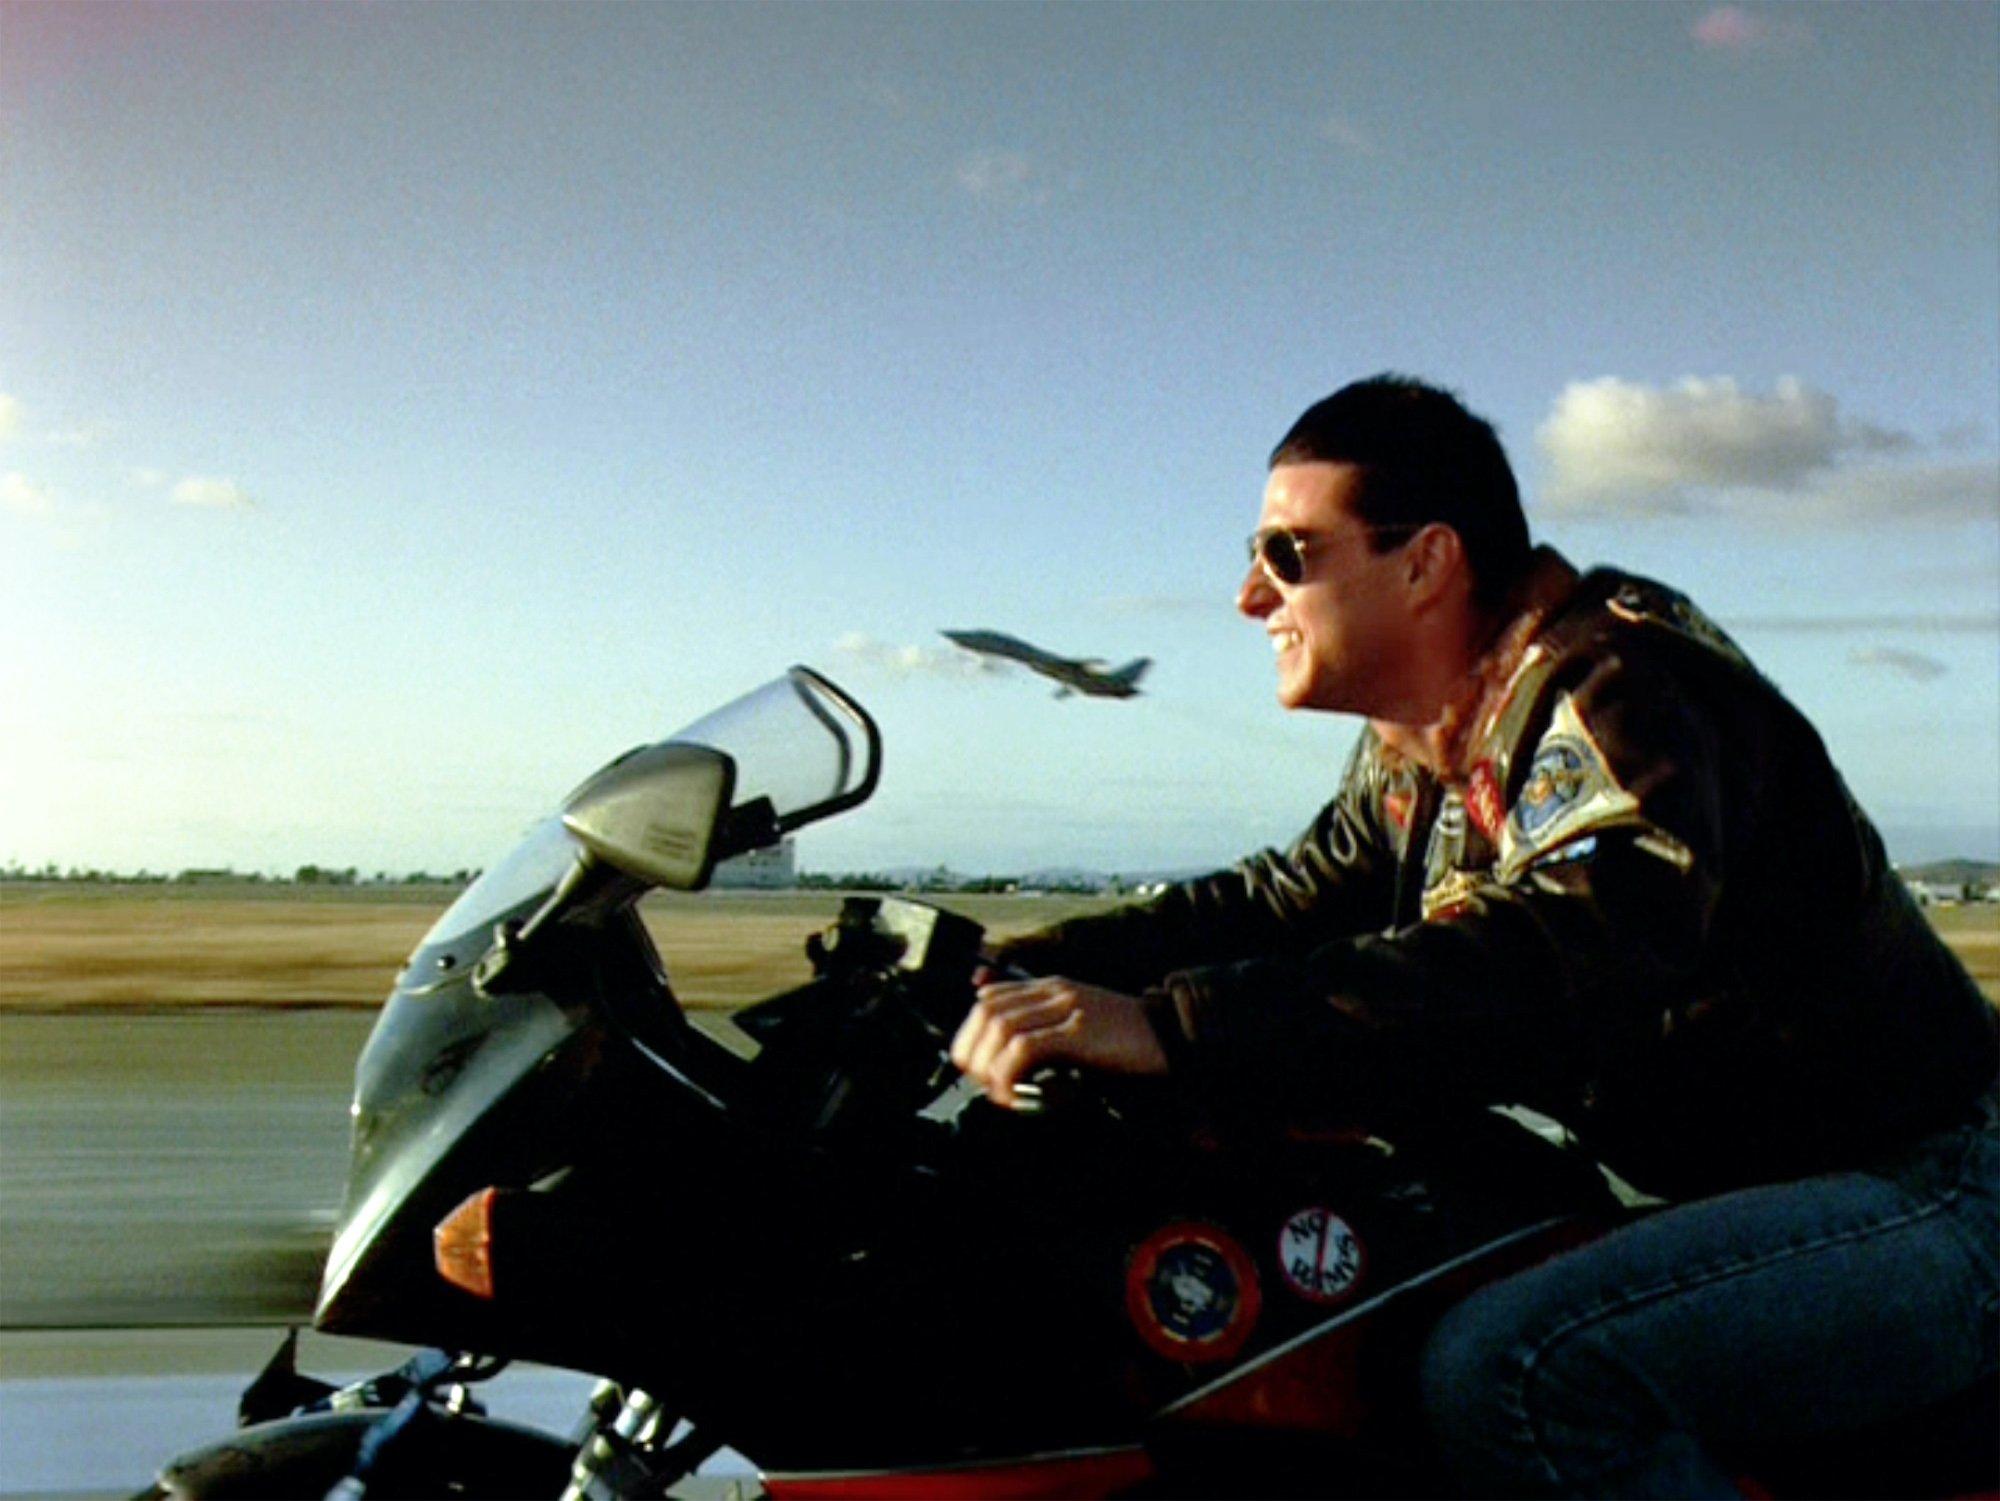 Tom Cruise as Lt. Pete 'Maverick' Mitchell on a motorcycle